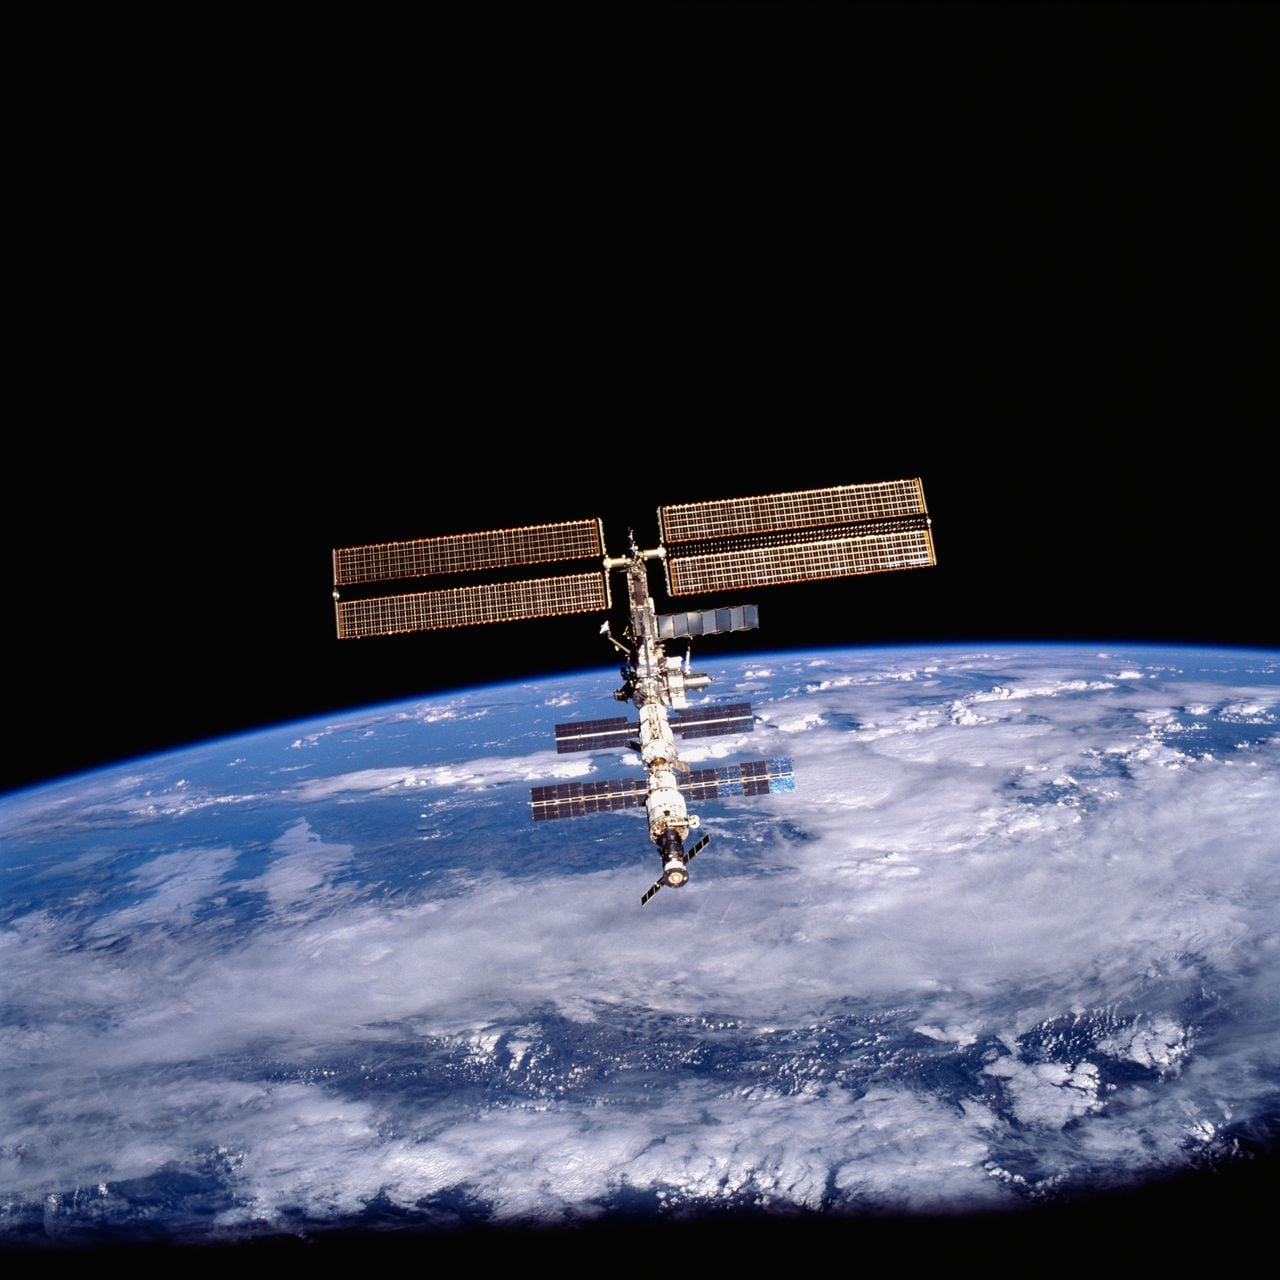 This image of the International Space Station (ISS) was photographed by one of the crewmembers of the STS-105 mission from the Shuttle Orbiter Discovery after separating from the ISS. The STS-105 mission was the 11th ISS assembly flight and its goals were the rotation of the ISS Expedition Two crew with Expedition Three crew, and the delivery of supplies utilizing the Italian-built Multipurpose Logistic Module (MPLM) Leonardo. Aboard Leonardo were six resupply stowage racks, four resupply stowage supply platforms, and two new scientific experiment racks, EXPRESS (Expedite the Processing of Experiments to the Space Station) Racks 4 and 5, which added science capabilities to the ISS. Another payload was the Materials International Space Station Experiment (MISSE), which included materials and other types of space exposure experiments mounted on the exterior of the ISS.